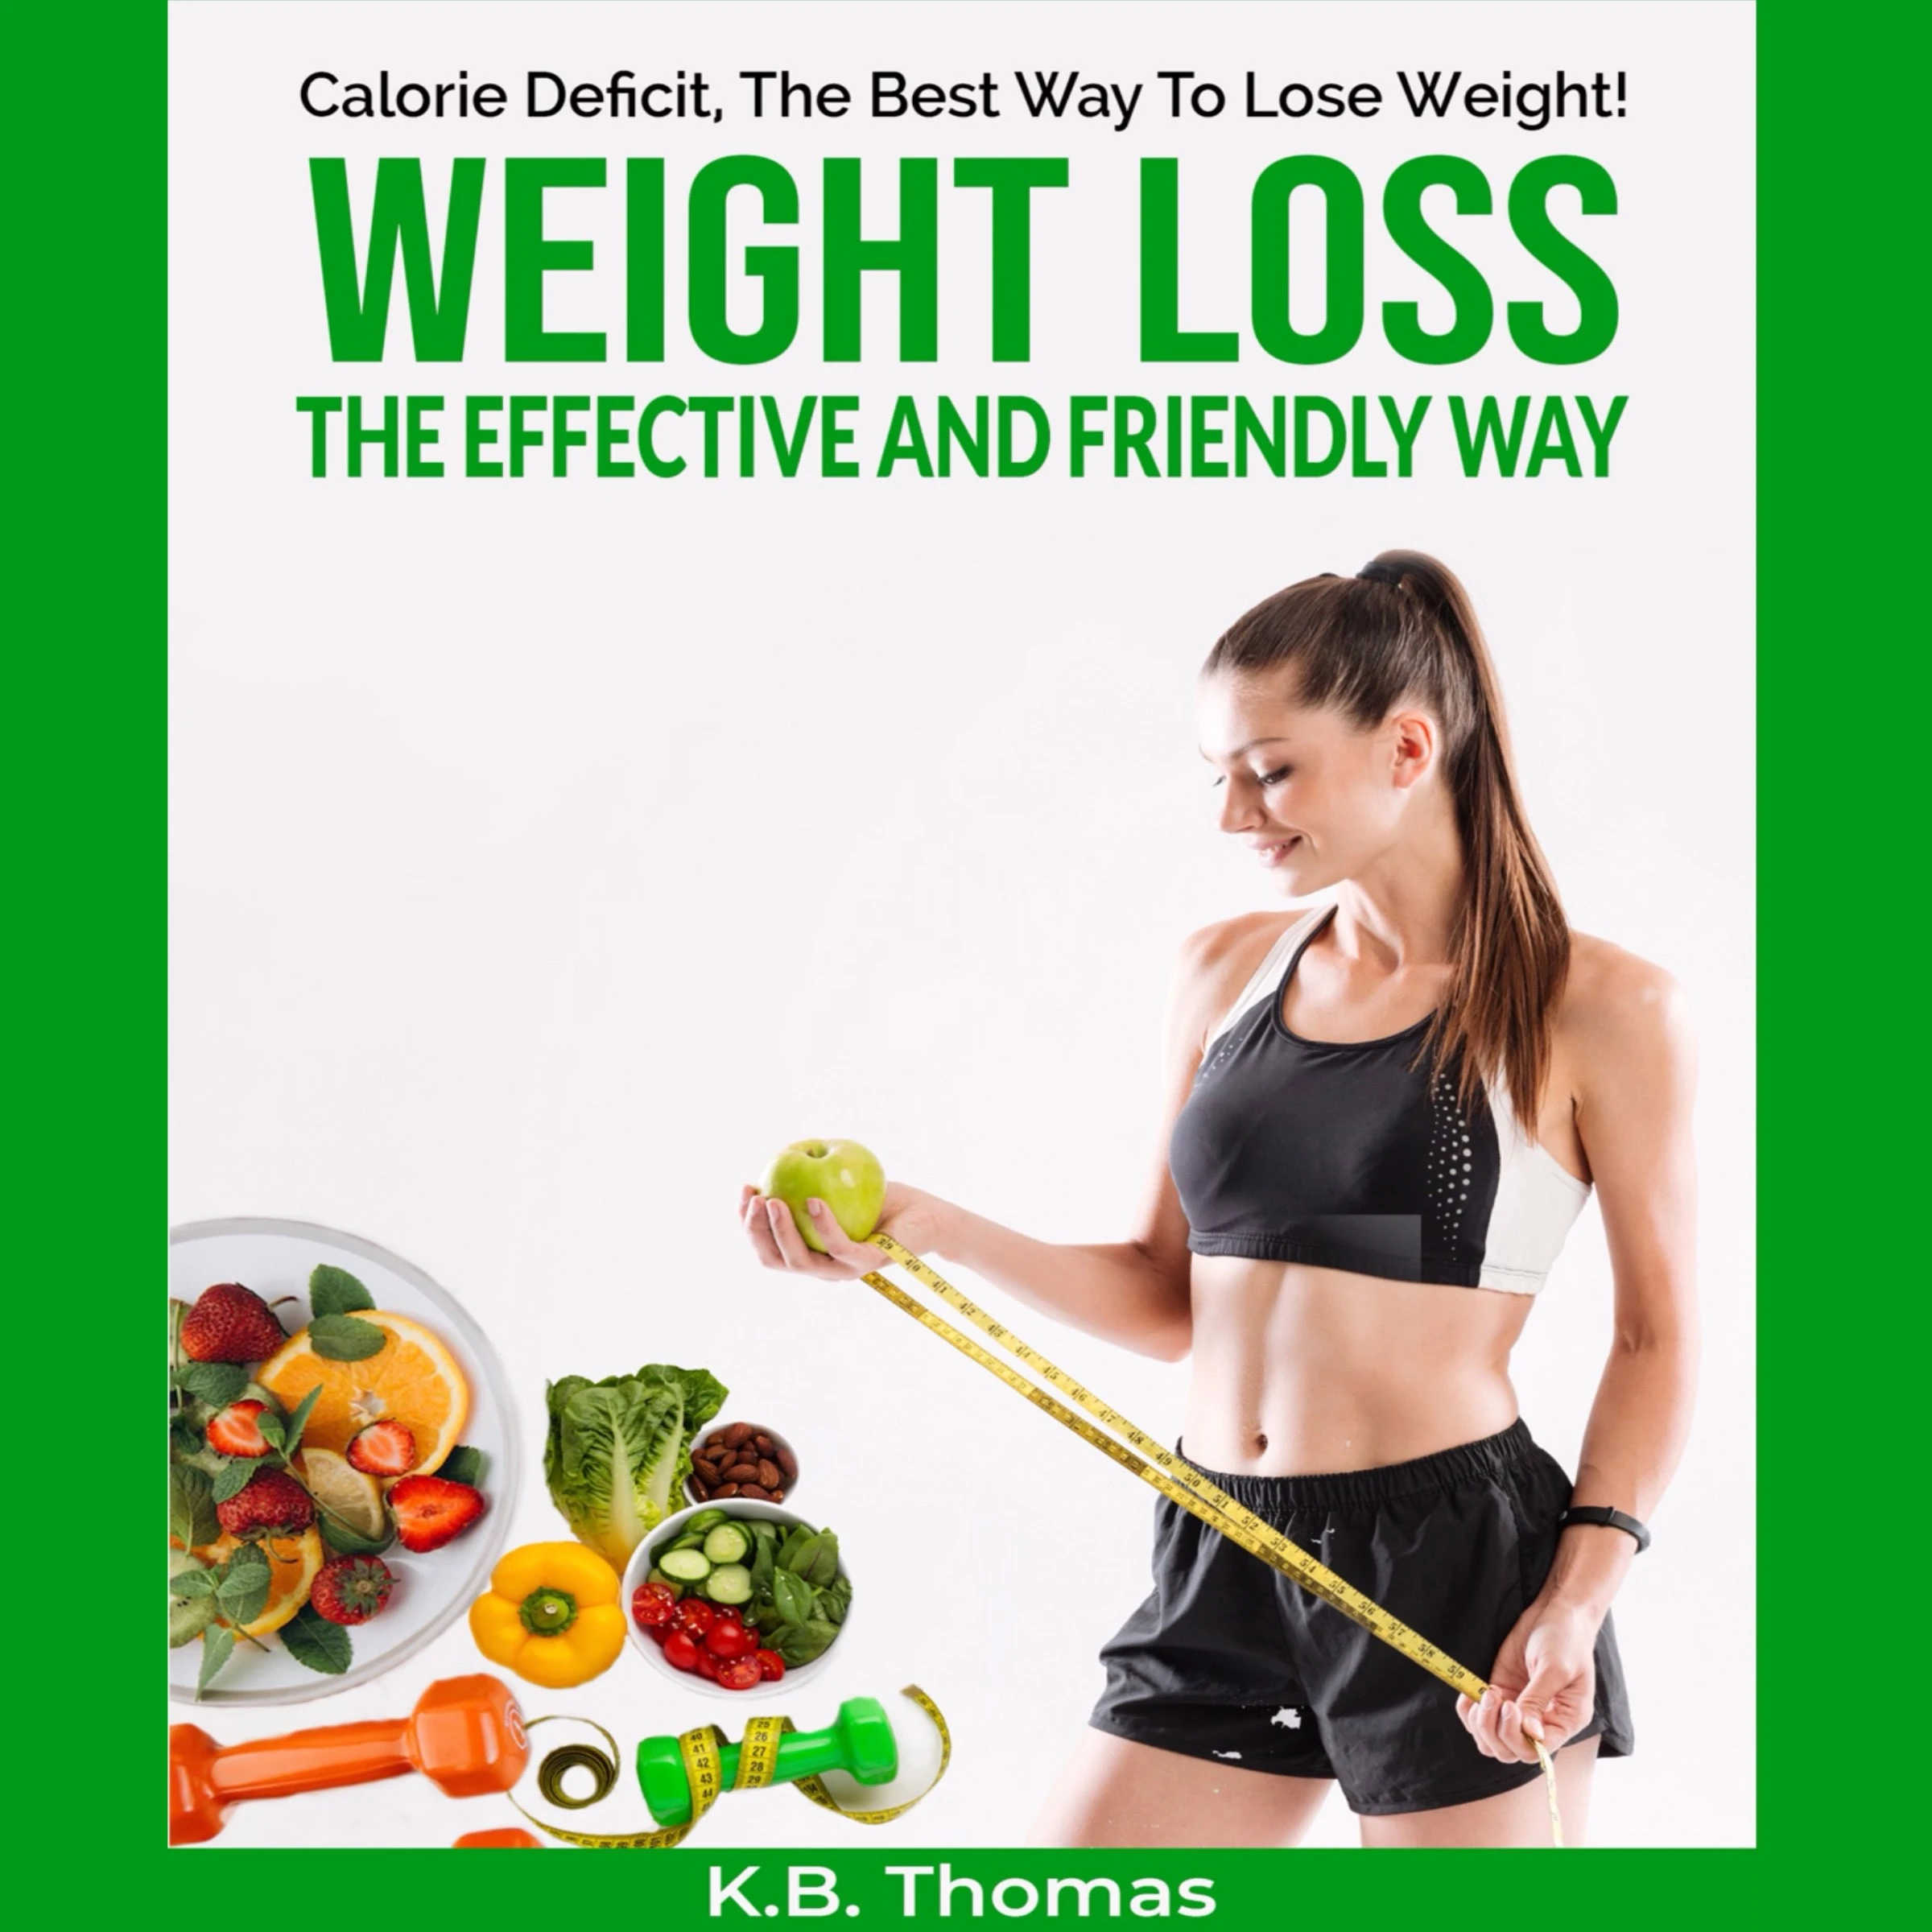 Calorie Deficit, The Best Way To Lose Weight! by K B. Thomas Audiobook